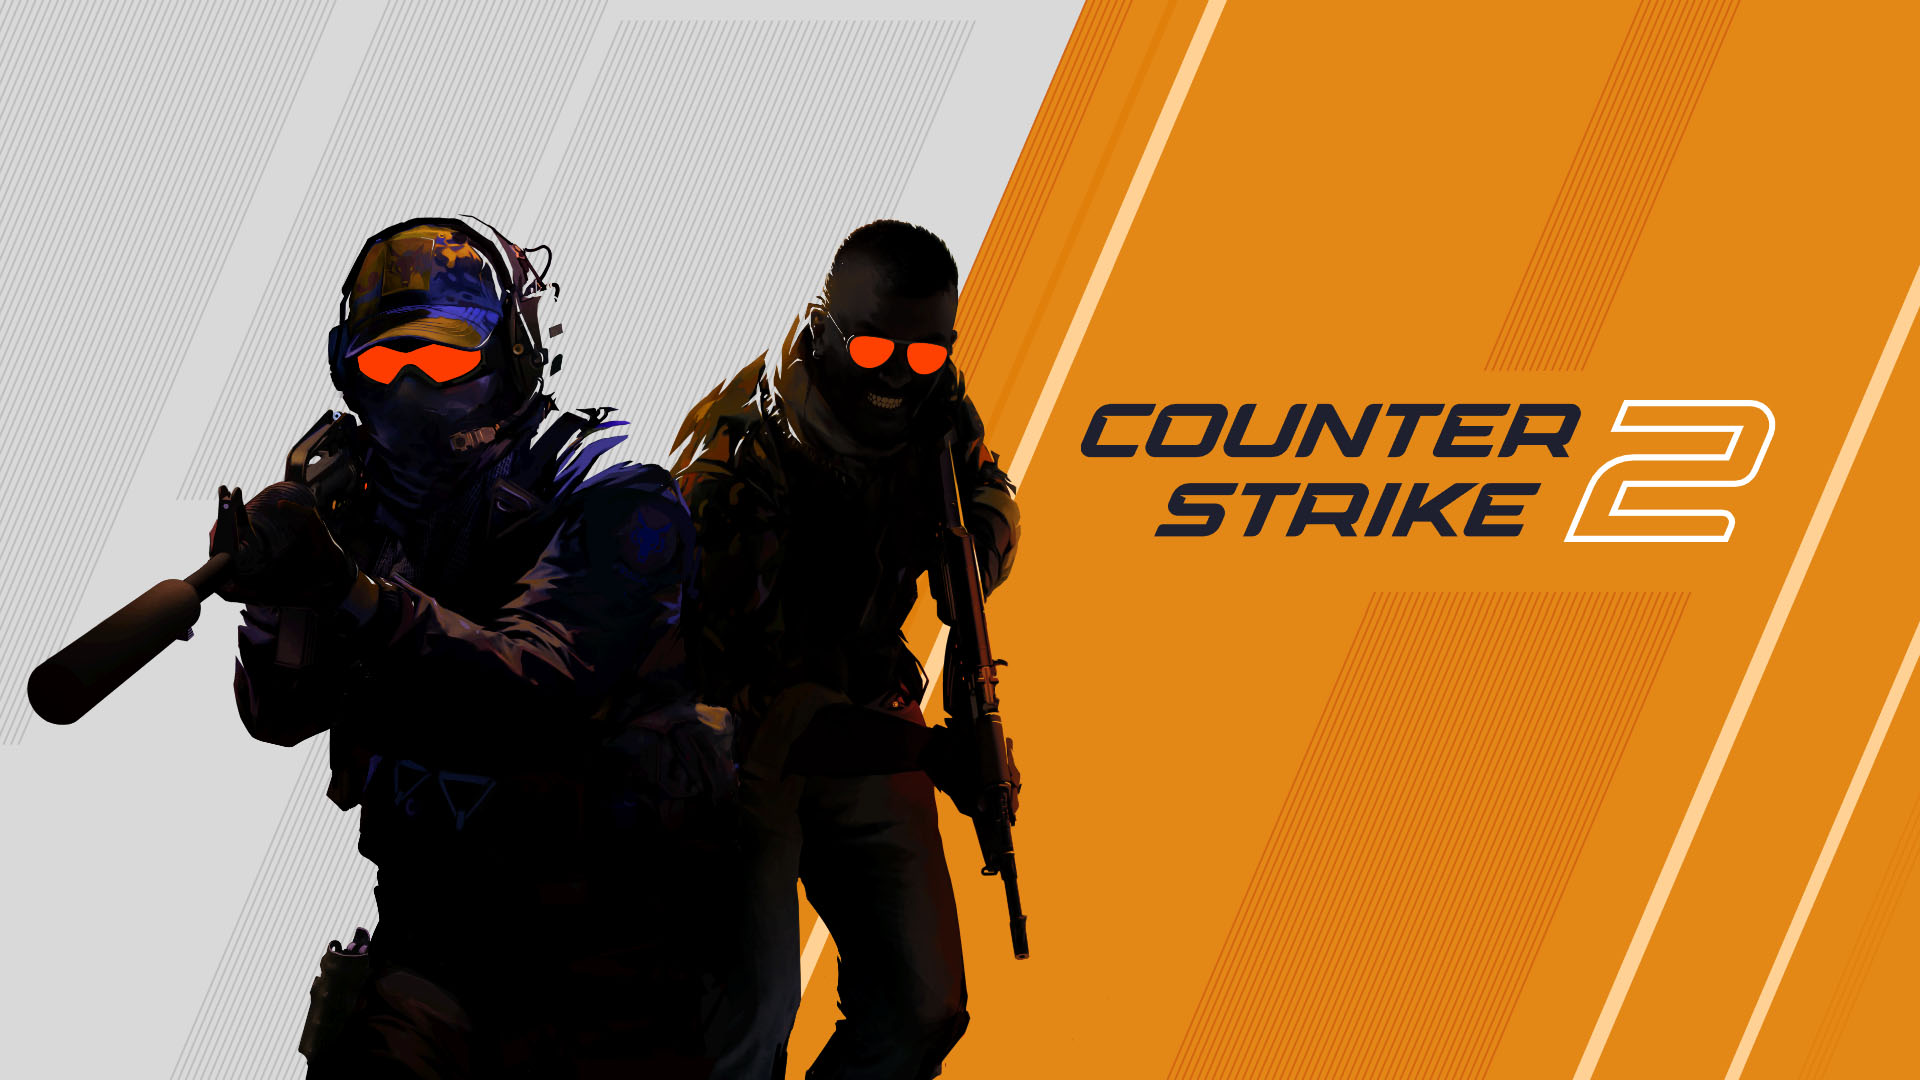 Counter-Strike 2 announced for PC